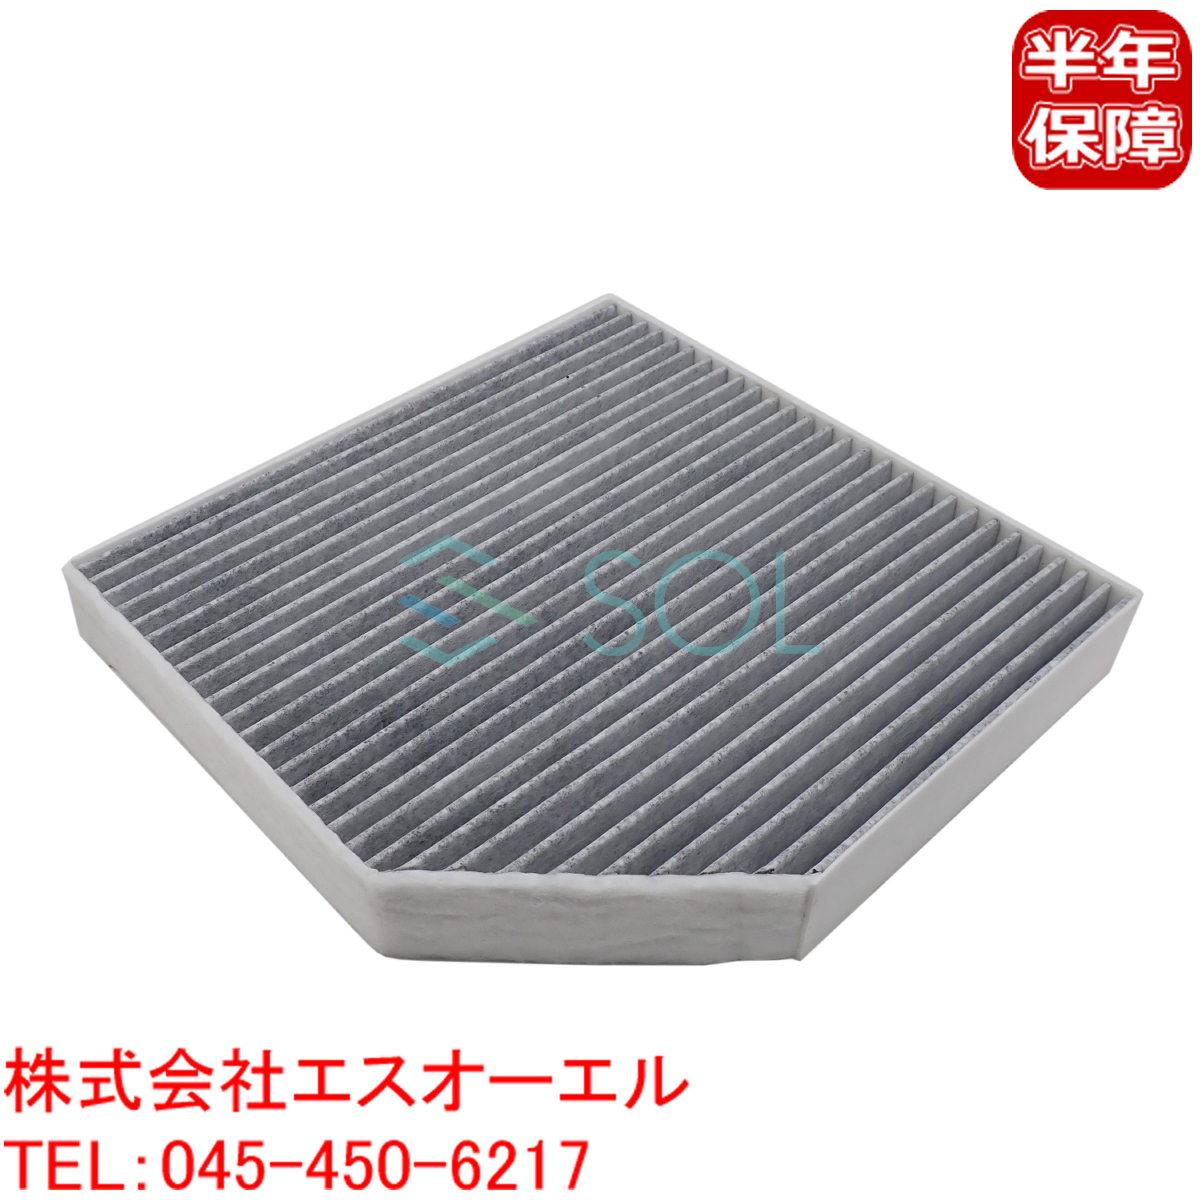  Audi A7 RS7 S7(4GA 4GF) A8 S8 D4(4H2 4H8 4HC 4HL) air conditioner filter with activated charcoal 4H0819439 shipping deadline 18 hour 